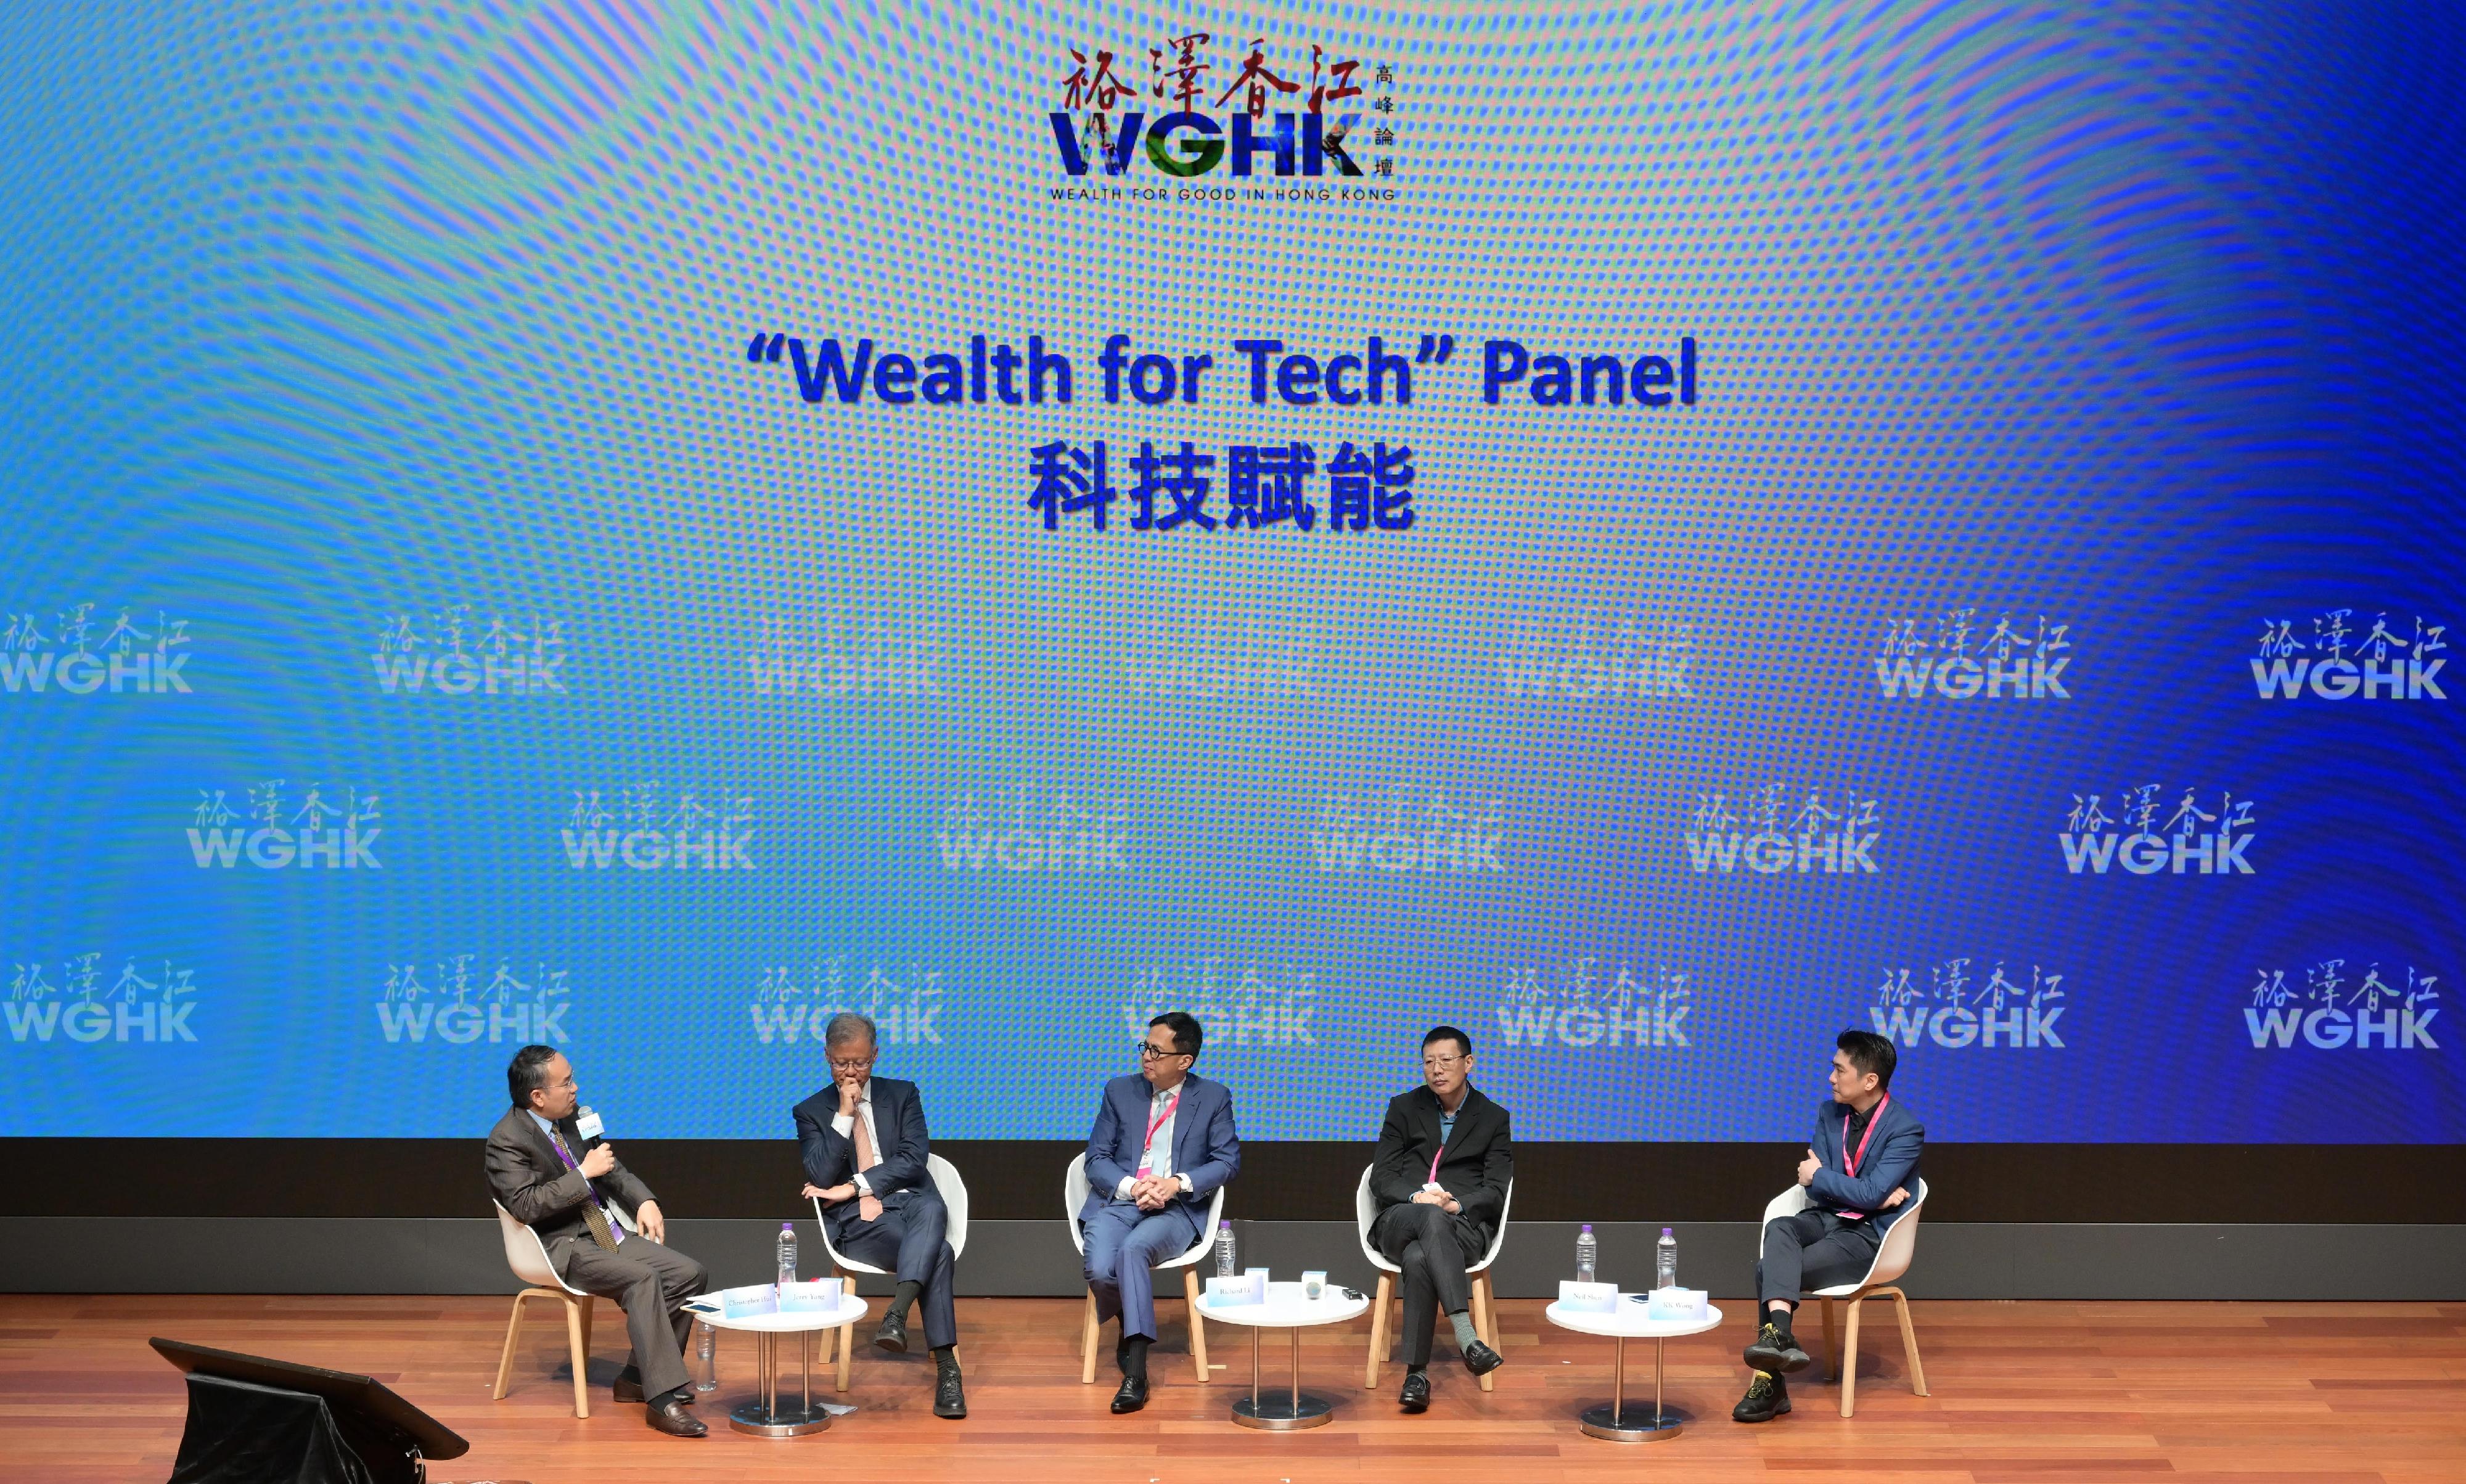 The "Wealth for Tech" panel discussion of the Wealth for Good in Hong Kong Summit, moderated by the Secretary for Financial Services and the Treasury, Mr Christopher Hui, today (March 24), focused on how family offices can contribute to game-changing innovation within the ever-dynamic tech sector. The speakers explored which latest technological trends offer the greatest potential for investment and how Hong Kong can leverage its position as both a financial and a growing innovation and technology hub to attract global family offices' investments in this area. Panel speakers (from left to right): Mr Hui; Founding Partner of AME Cloud Ventures and Co-founder and former CEO of Yahoo! Inc, Mr Jerry Yang; the Chairman and Chief Executive of Pacific Century Group, Mr Richard Li; the Founding and Managing Partner of Sequoia China, Mr Neil Shen; and Co-founder of Xiaomi and Director of Xiaomi Foundation, Mr KK Wong.